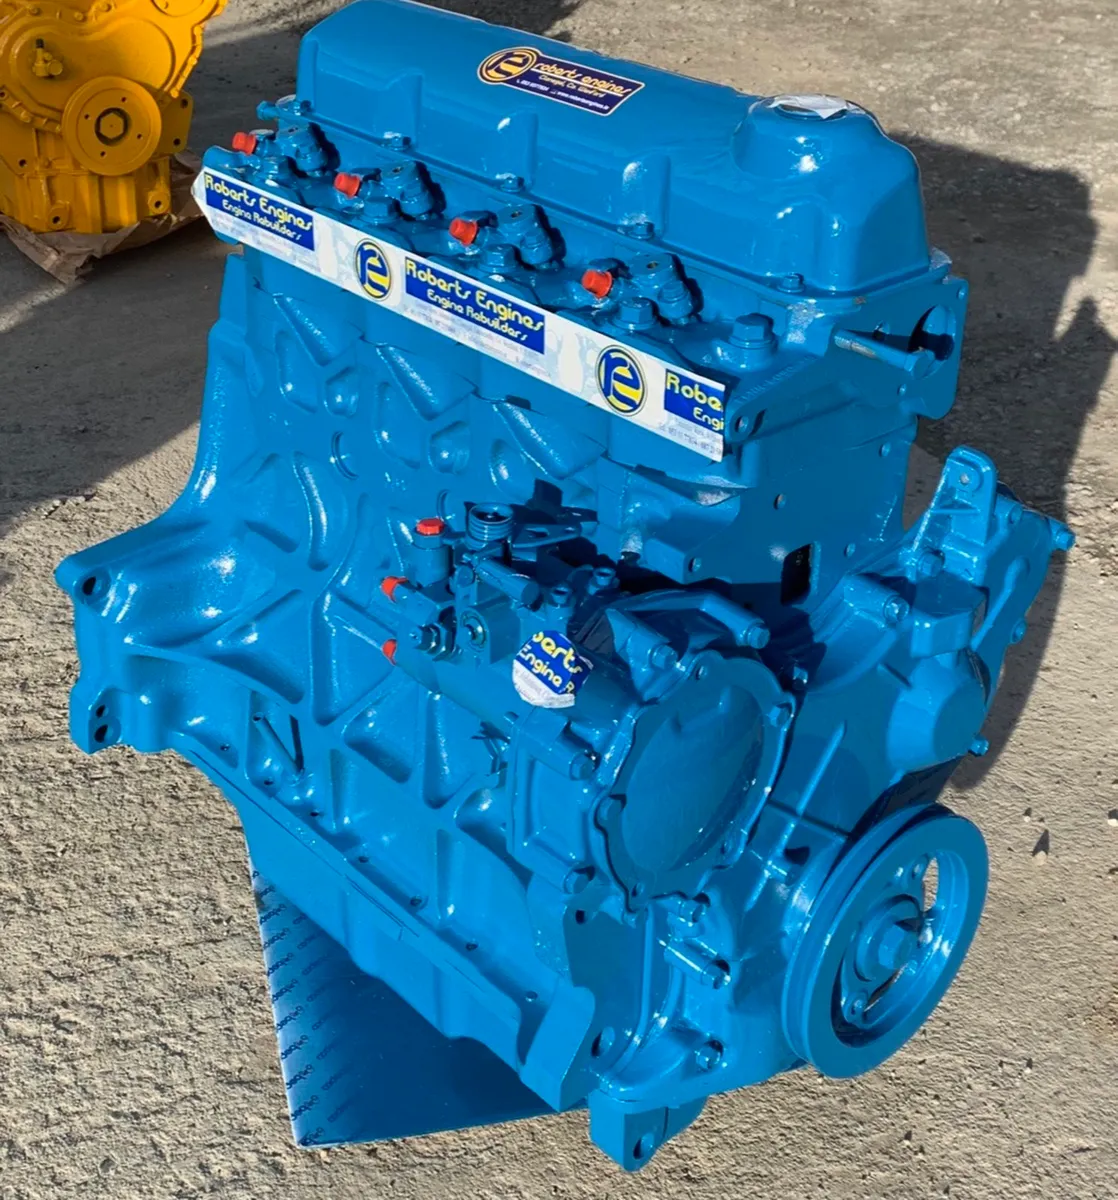 Reconditioned Ford 7610 engine